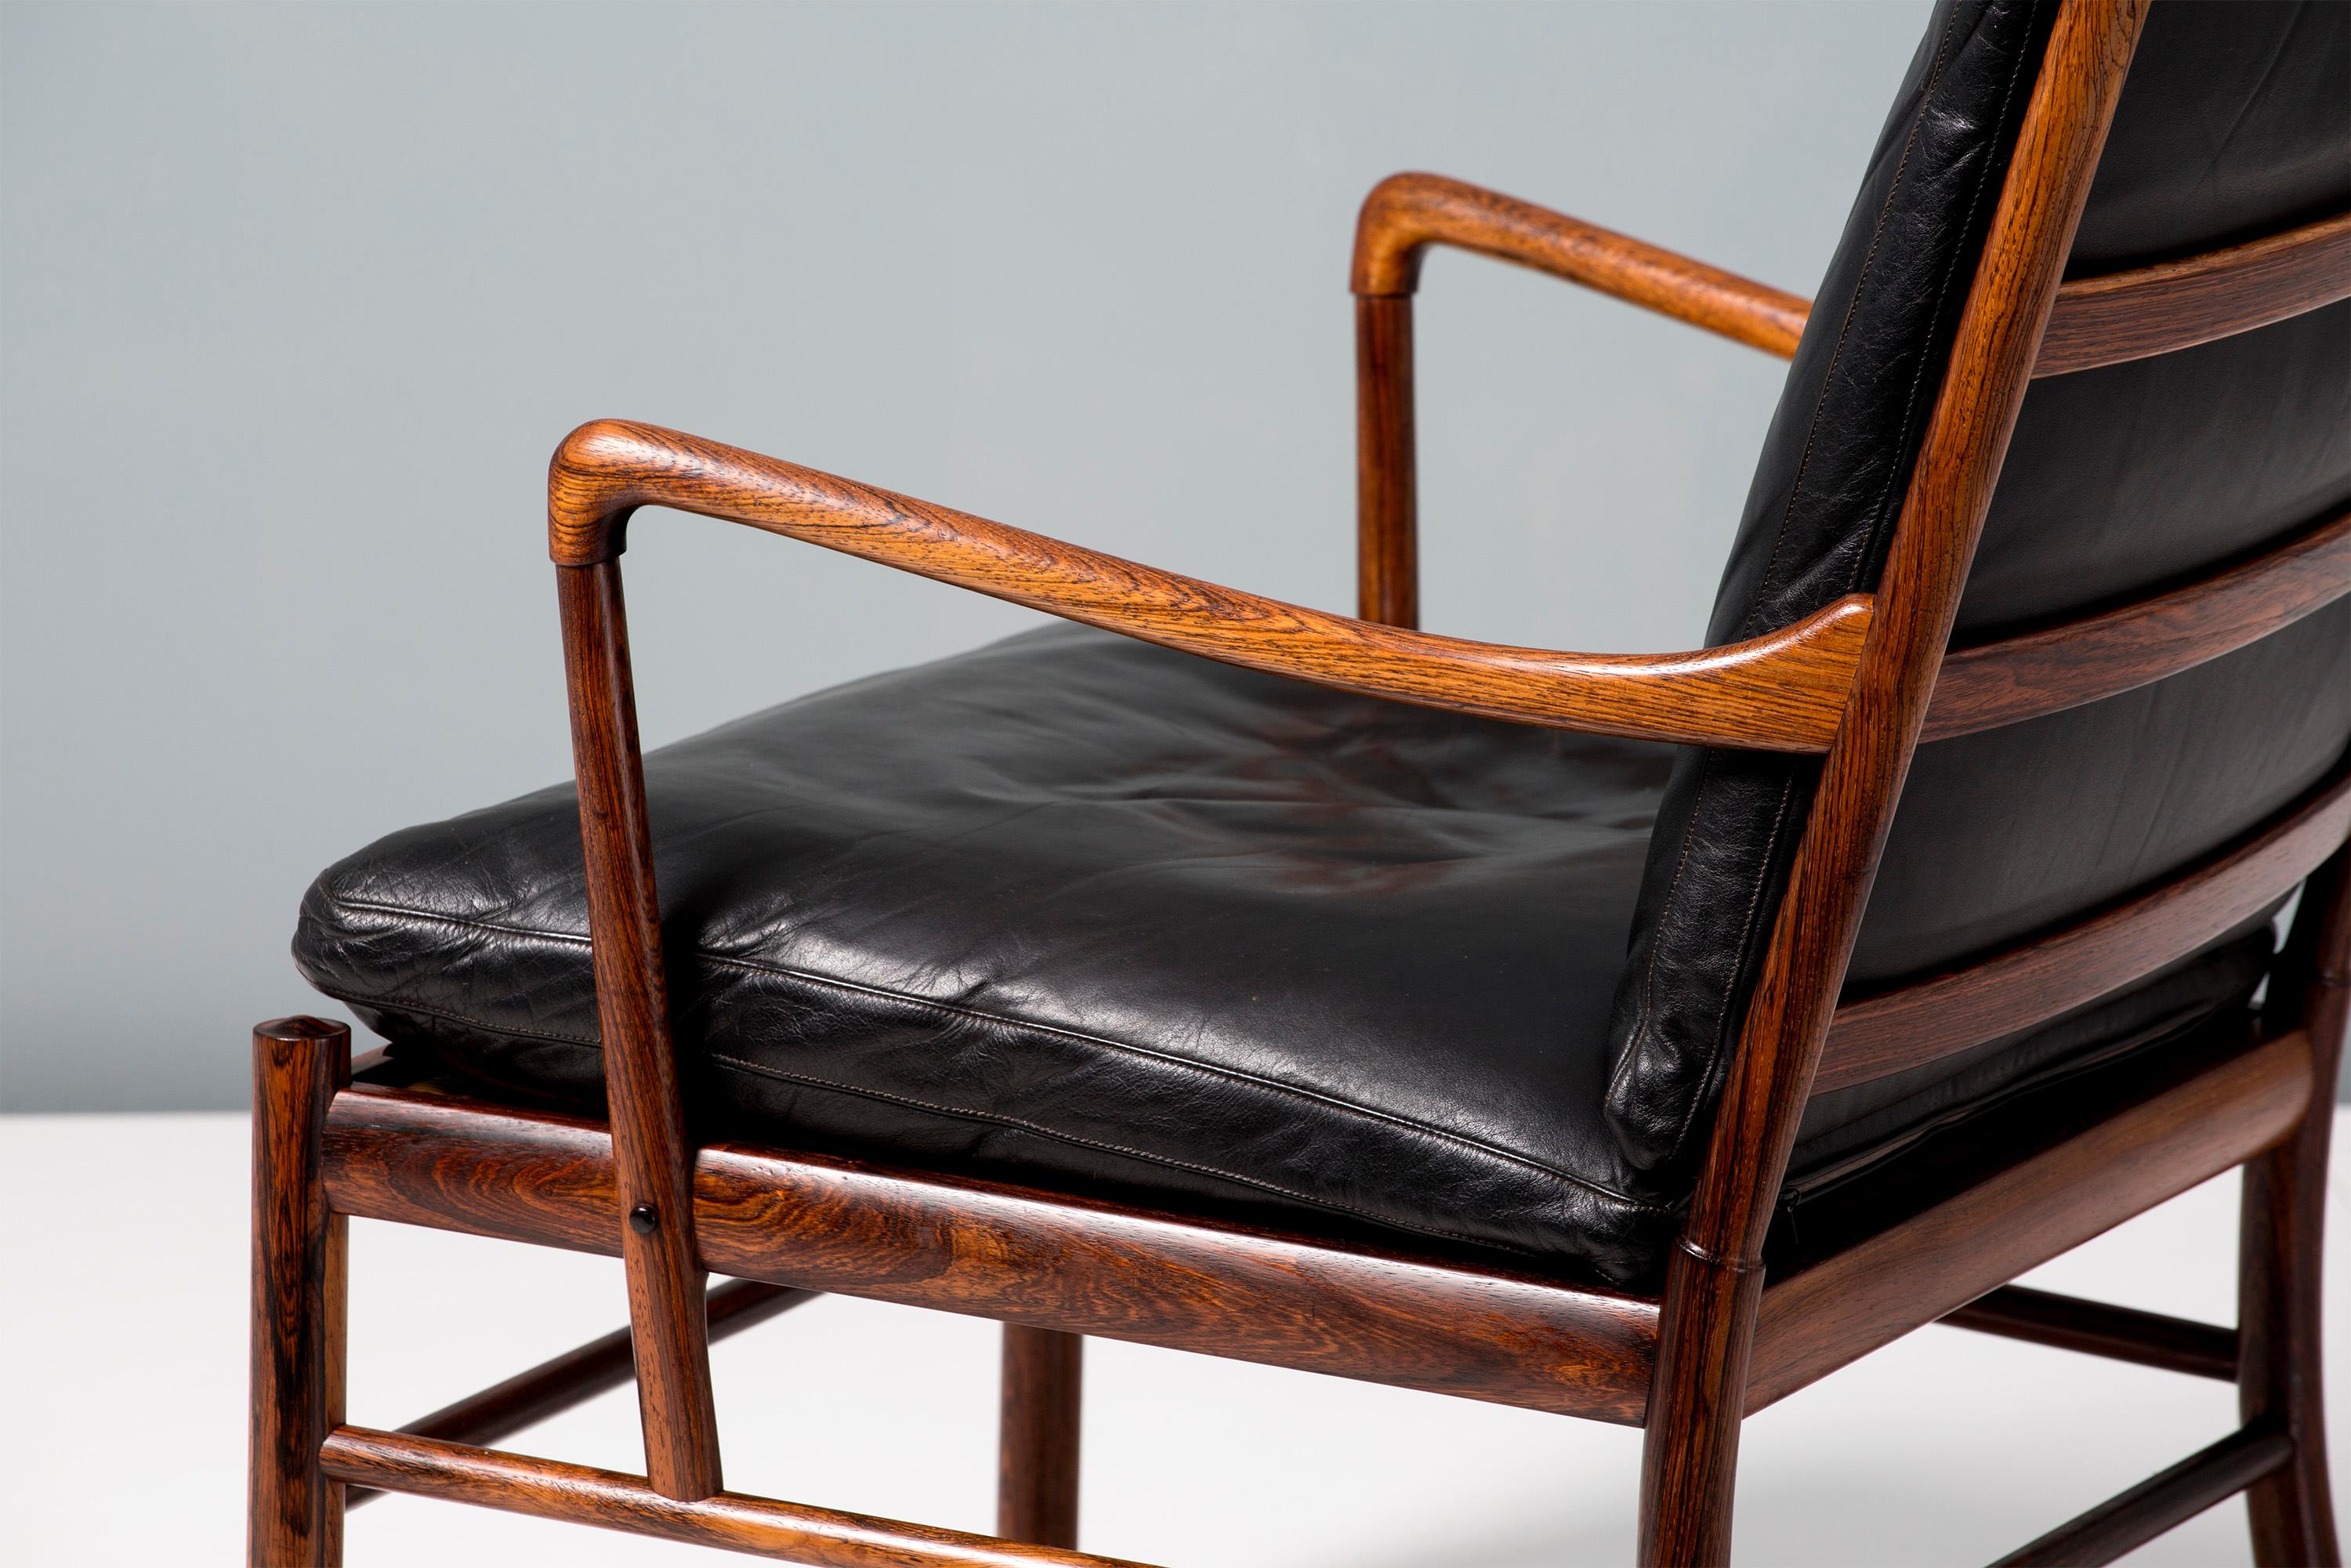 Ole Wanscher

PJ-149 Colonial chair and ottoman, 1949

A fine example of Ole Wanscher's most iconic design: The Colonial chair. Produced by Poul Jeppesen in Denmark circa 1950s in exquisite Brazilian rosewood with original woven rattan cane seat